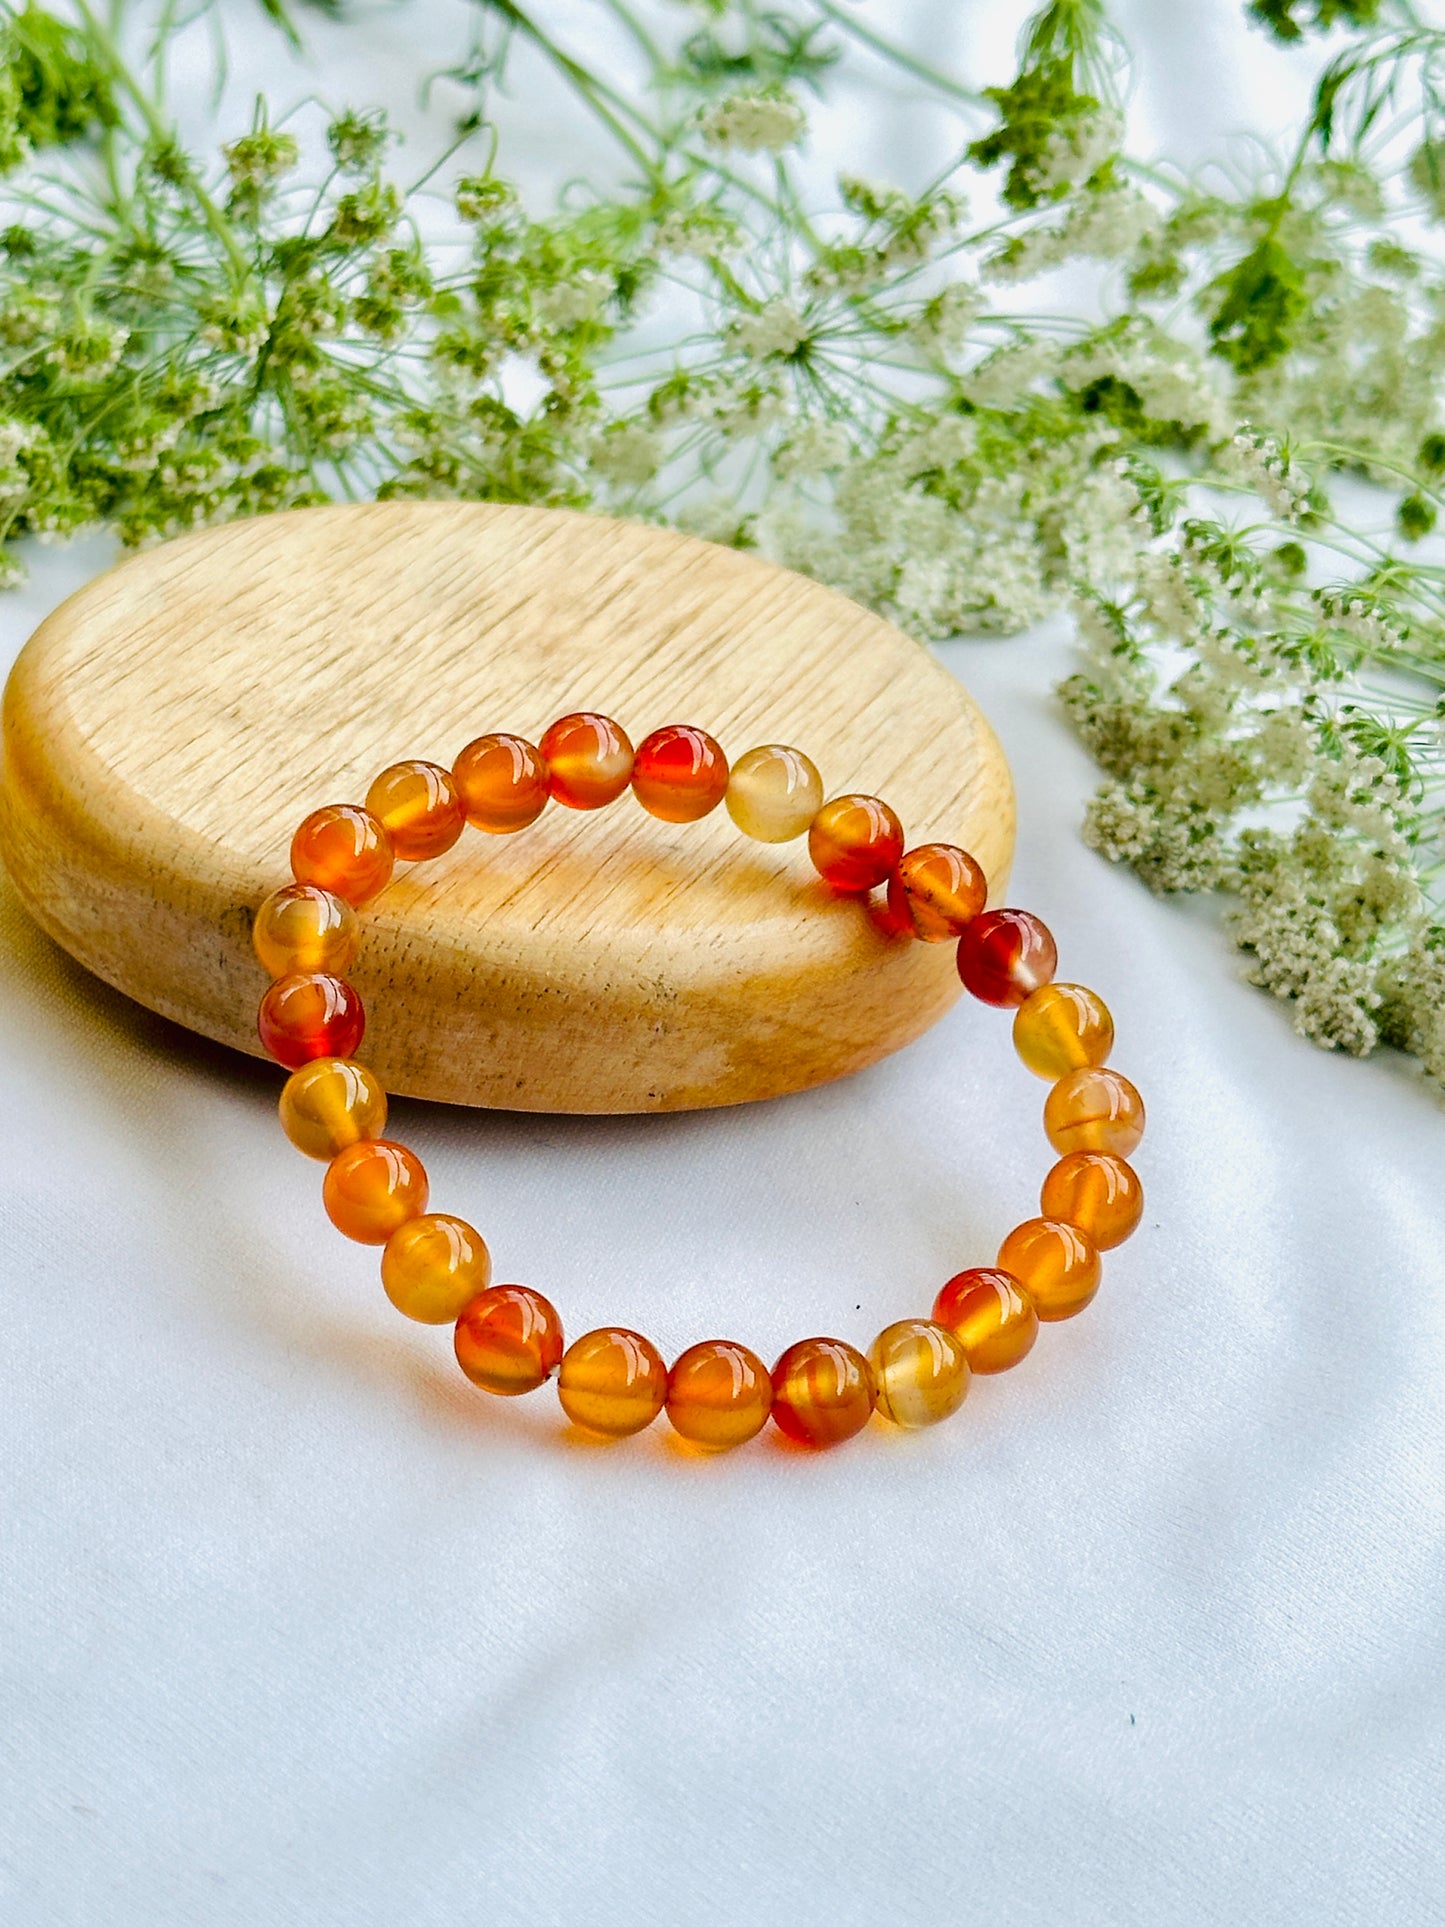 Purifies Blood, Lungs, Liver and Heart Bracelet (Carnelian) - Abhimantrit & Certified